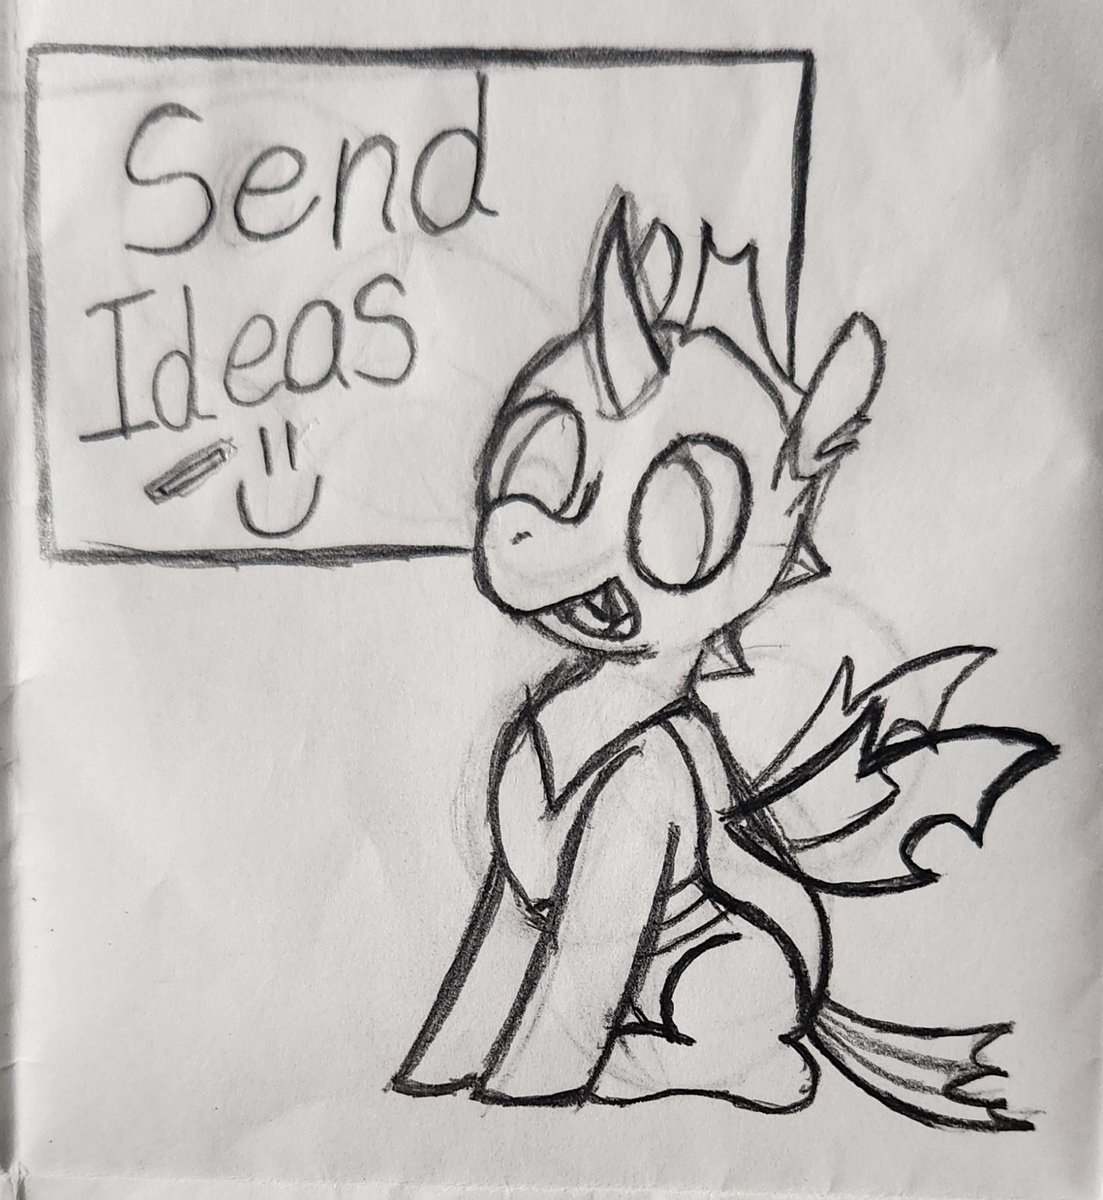 I want to draw silly horsies, bugs, griffons, and hippogriffs :D
Send cute ideas!